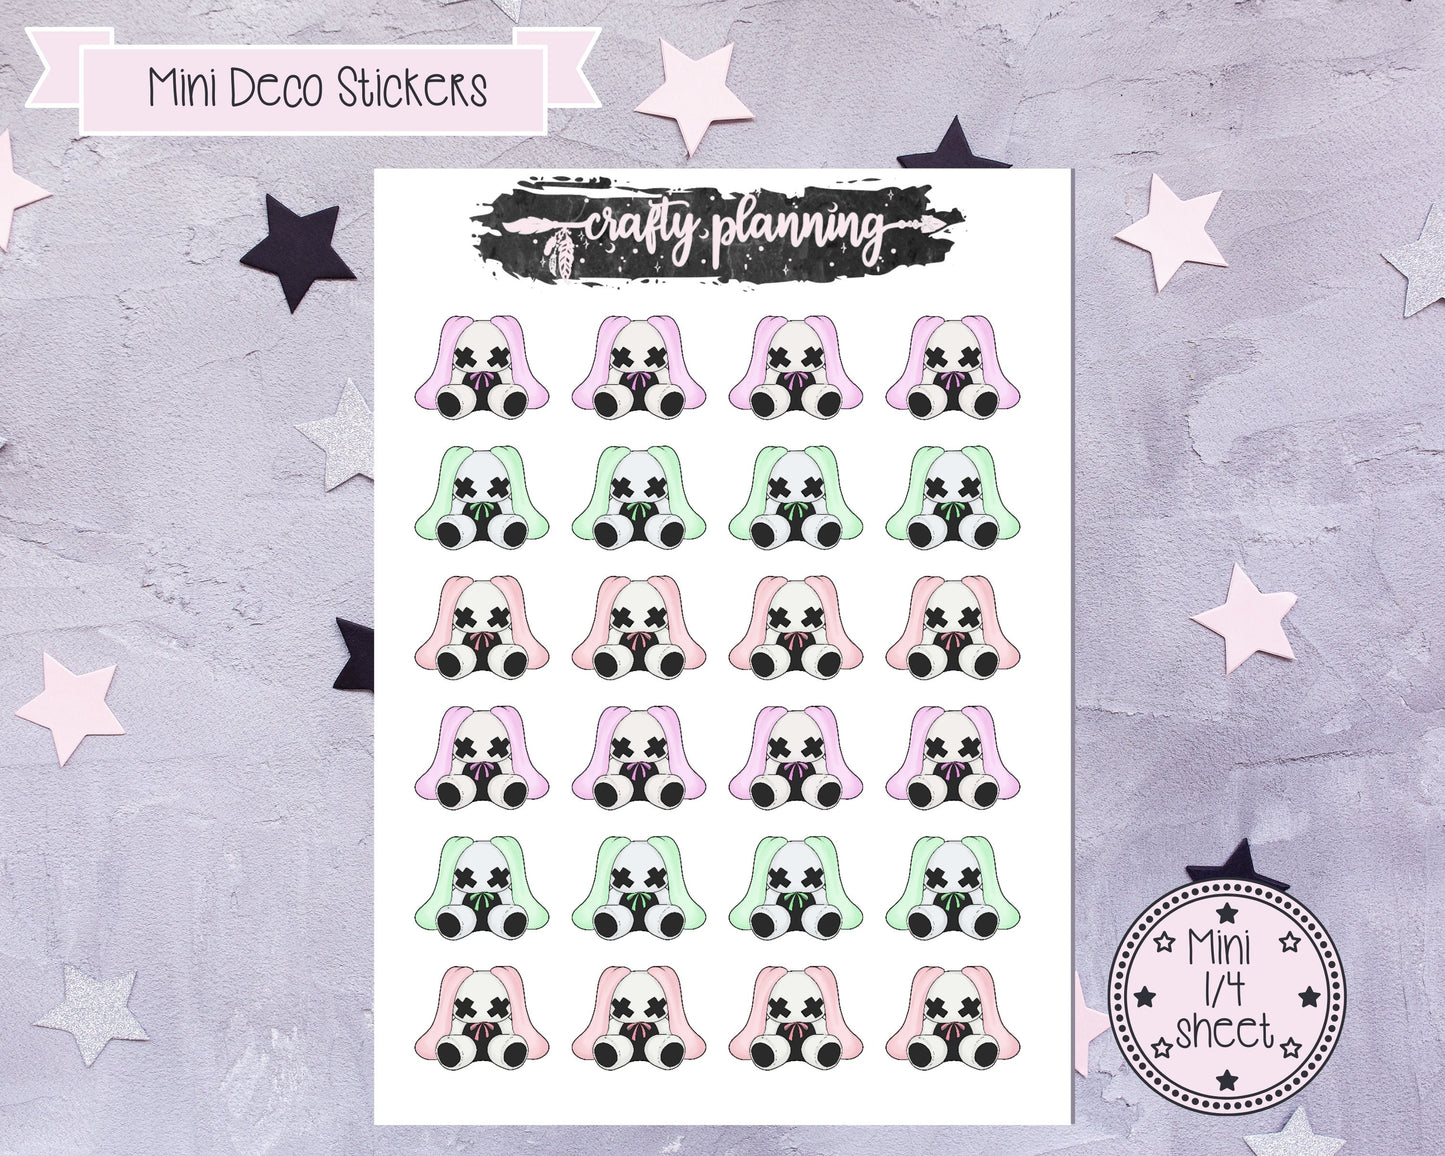 Gothic Bunny Stickers, Pastel Goth Stickers, Halloween Stickers, Planner Stickers, Goth Stickers, Deco Stickers